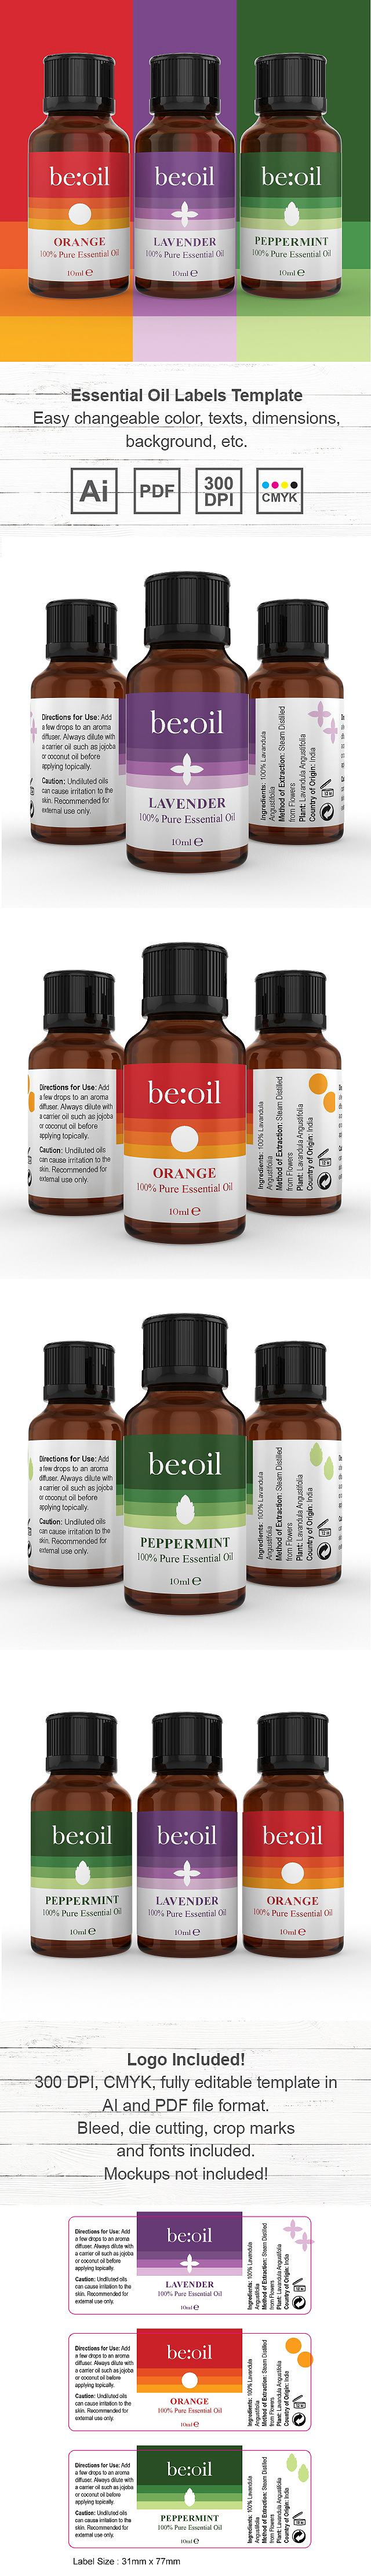 Essential Oil Labels Template